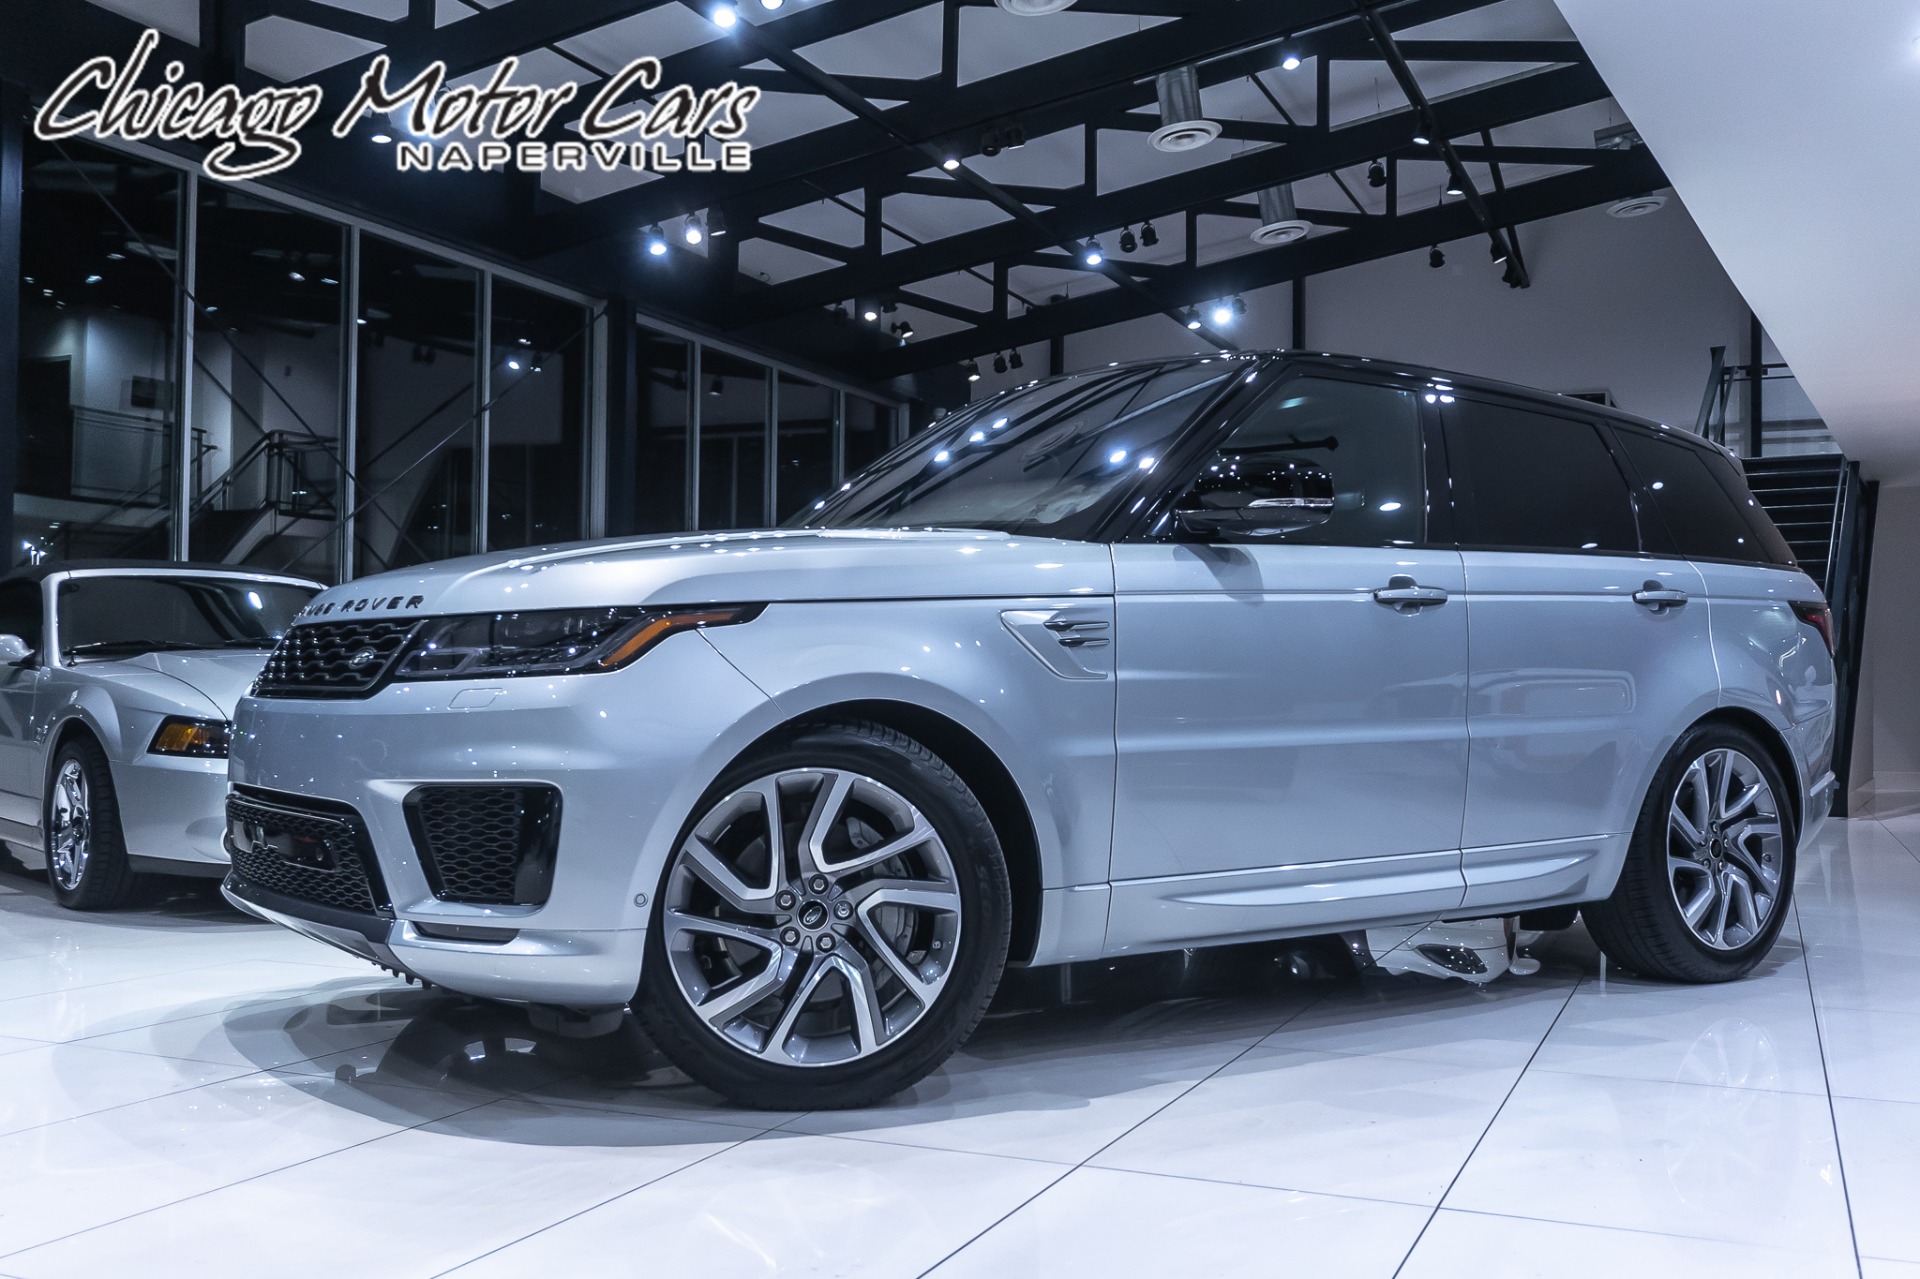 Used 2021 Land Rover Range Rover Sport HSE Silver Edition Drive Pro Pack  Only 3k Miles! Black Contrast Roof For Sale (Special Pricing) | Chicago  Motor Cars Stock #19006